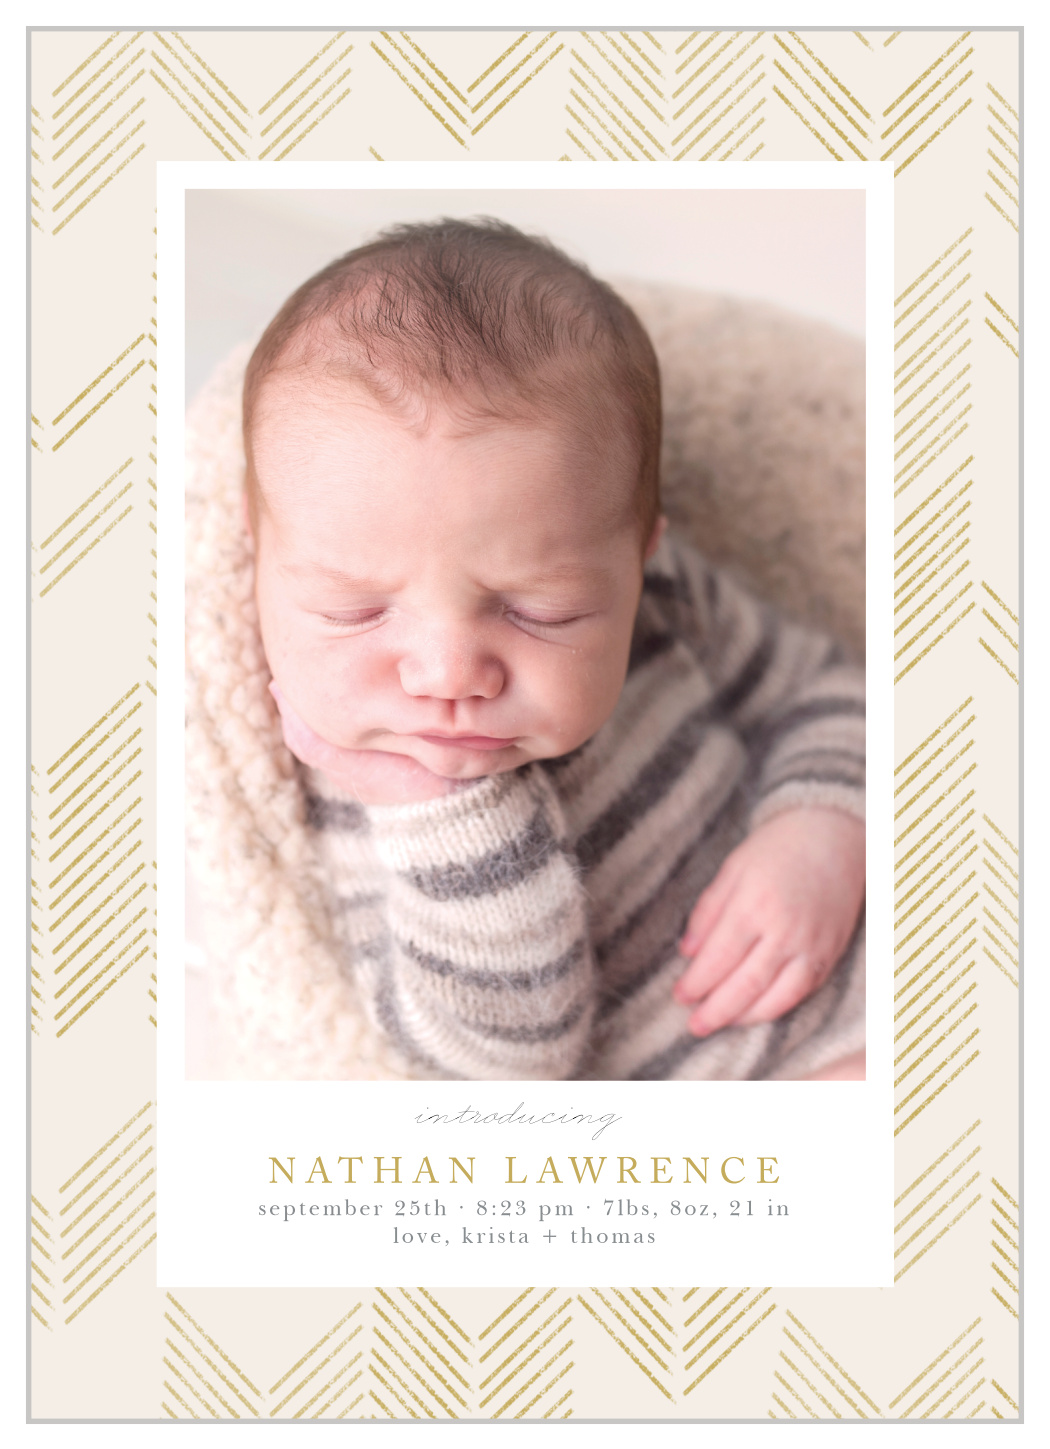 Brushed Chevron Birth Announcements